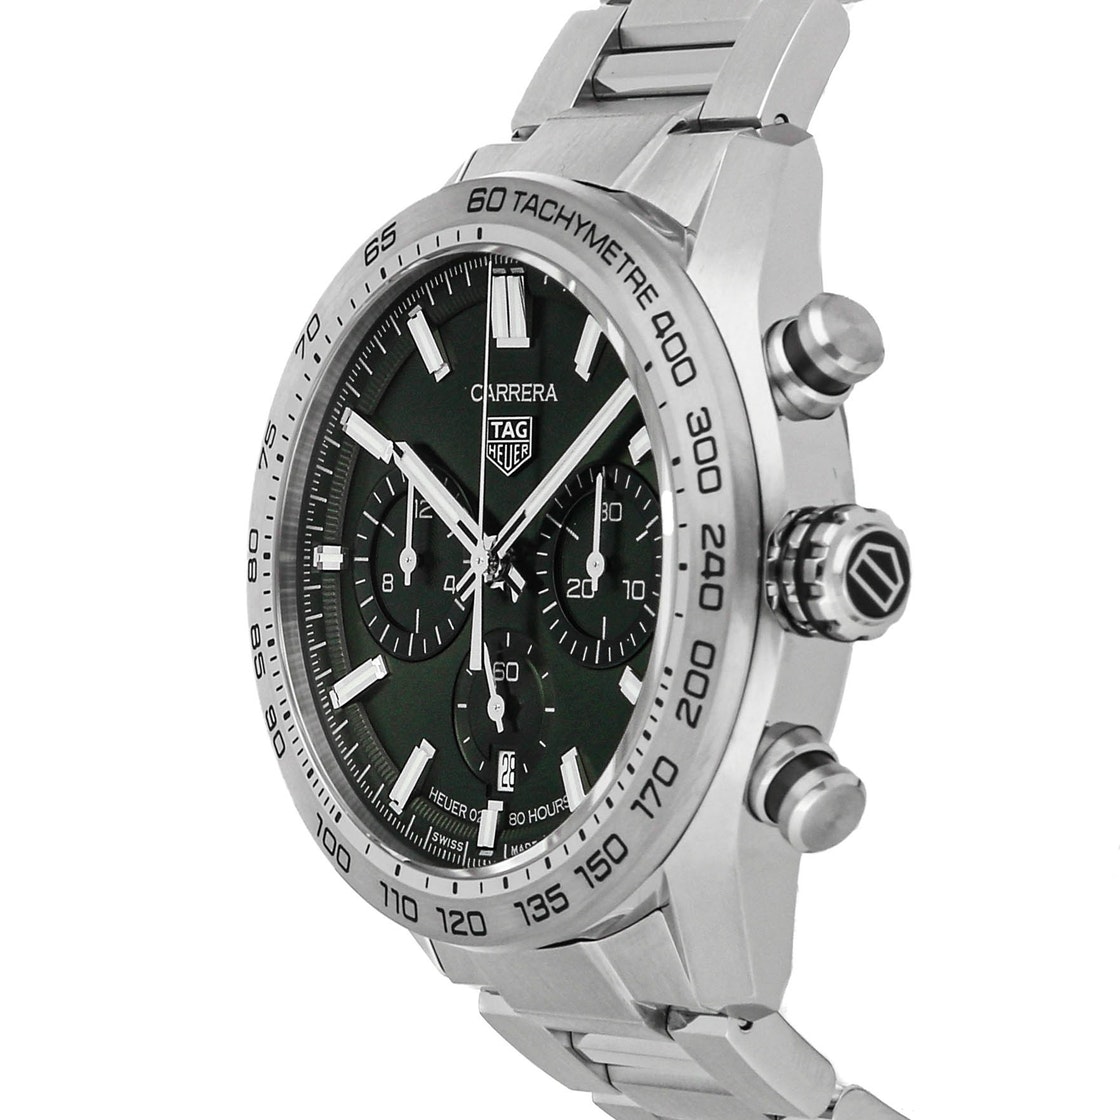 

Tag Heuer Green Stainless Steel Carrera Chronograph CBN2A10.BA0643 Men's Wristwatch 44 MM